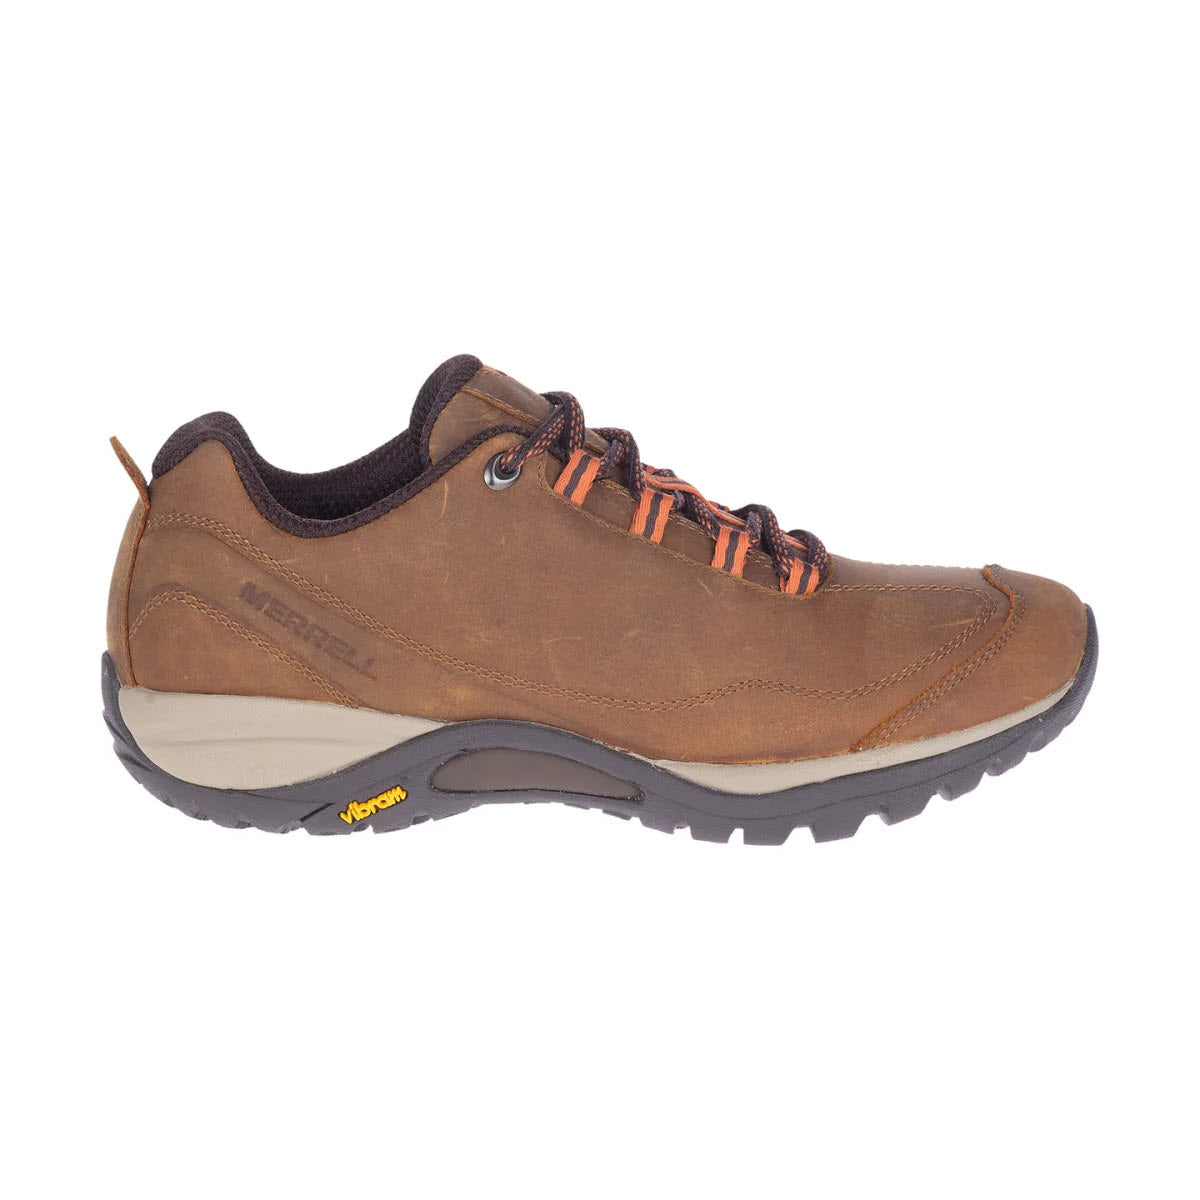 Side view of a brown leather Merrell Siren Traveller 3 Tan hiking shoe with orange laces and a Vibram sole, isolated on a white background.